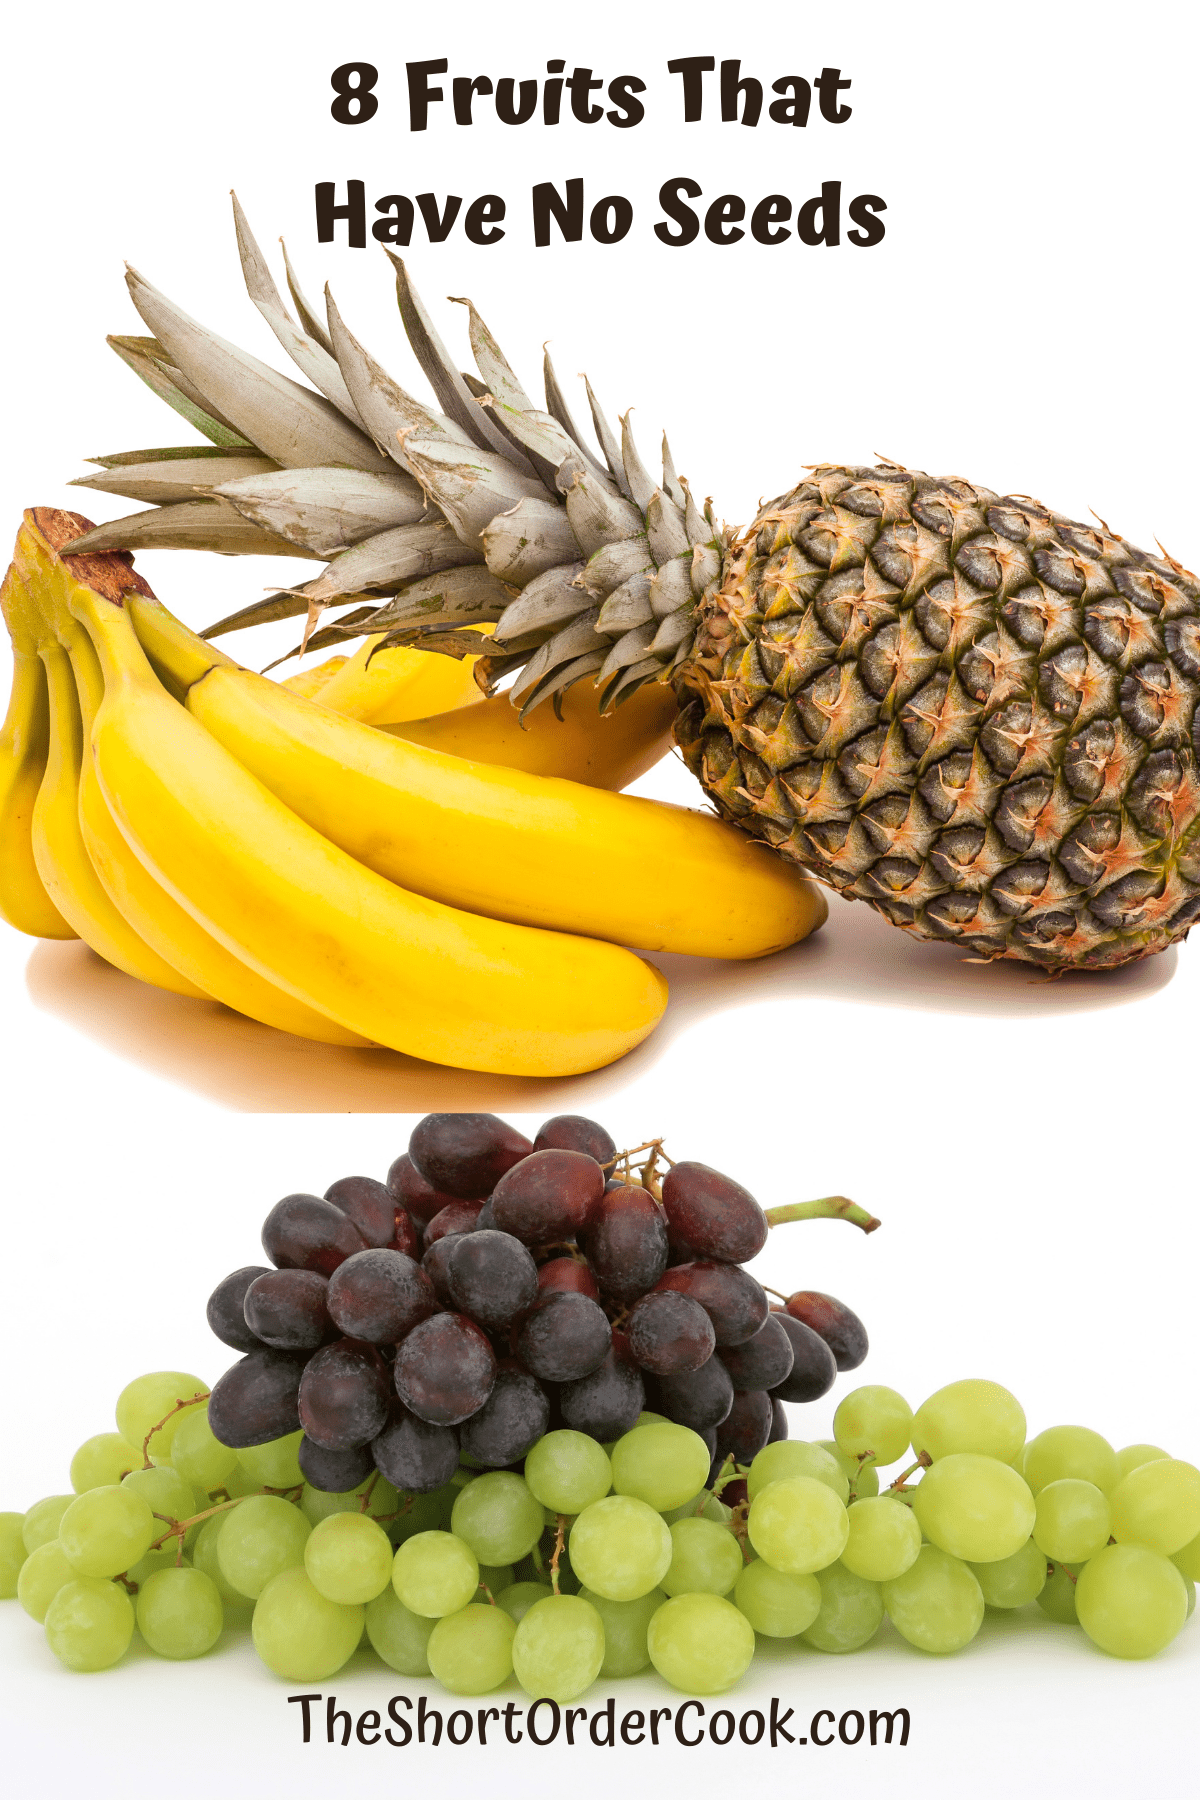 Pineapple banana and grapes with a white background are all seedless.